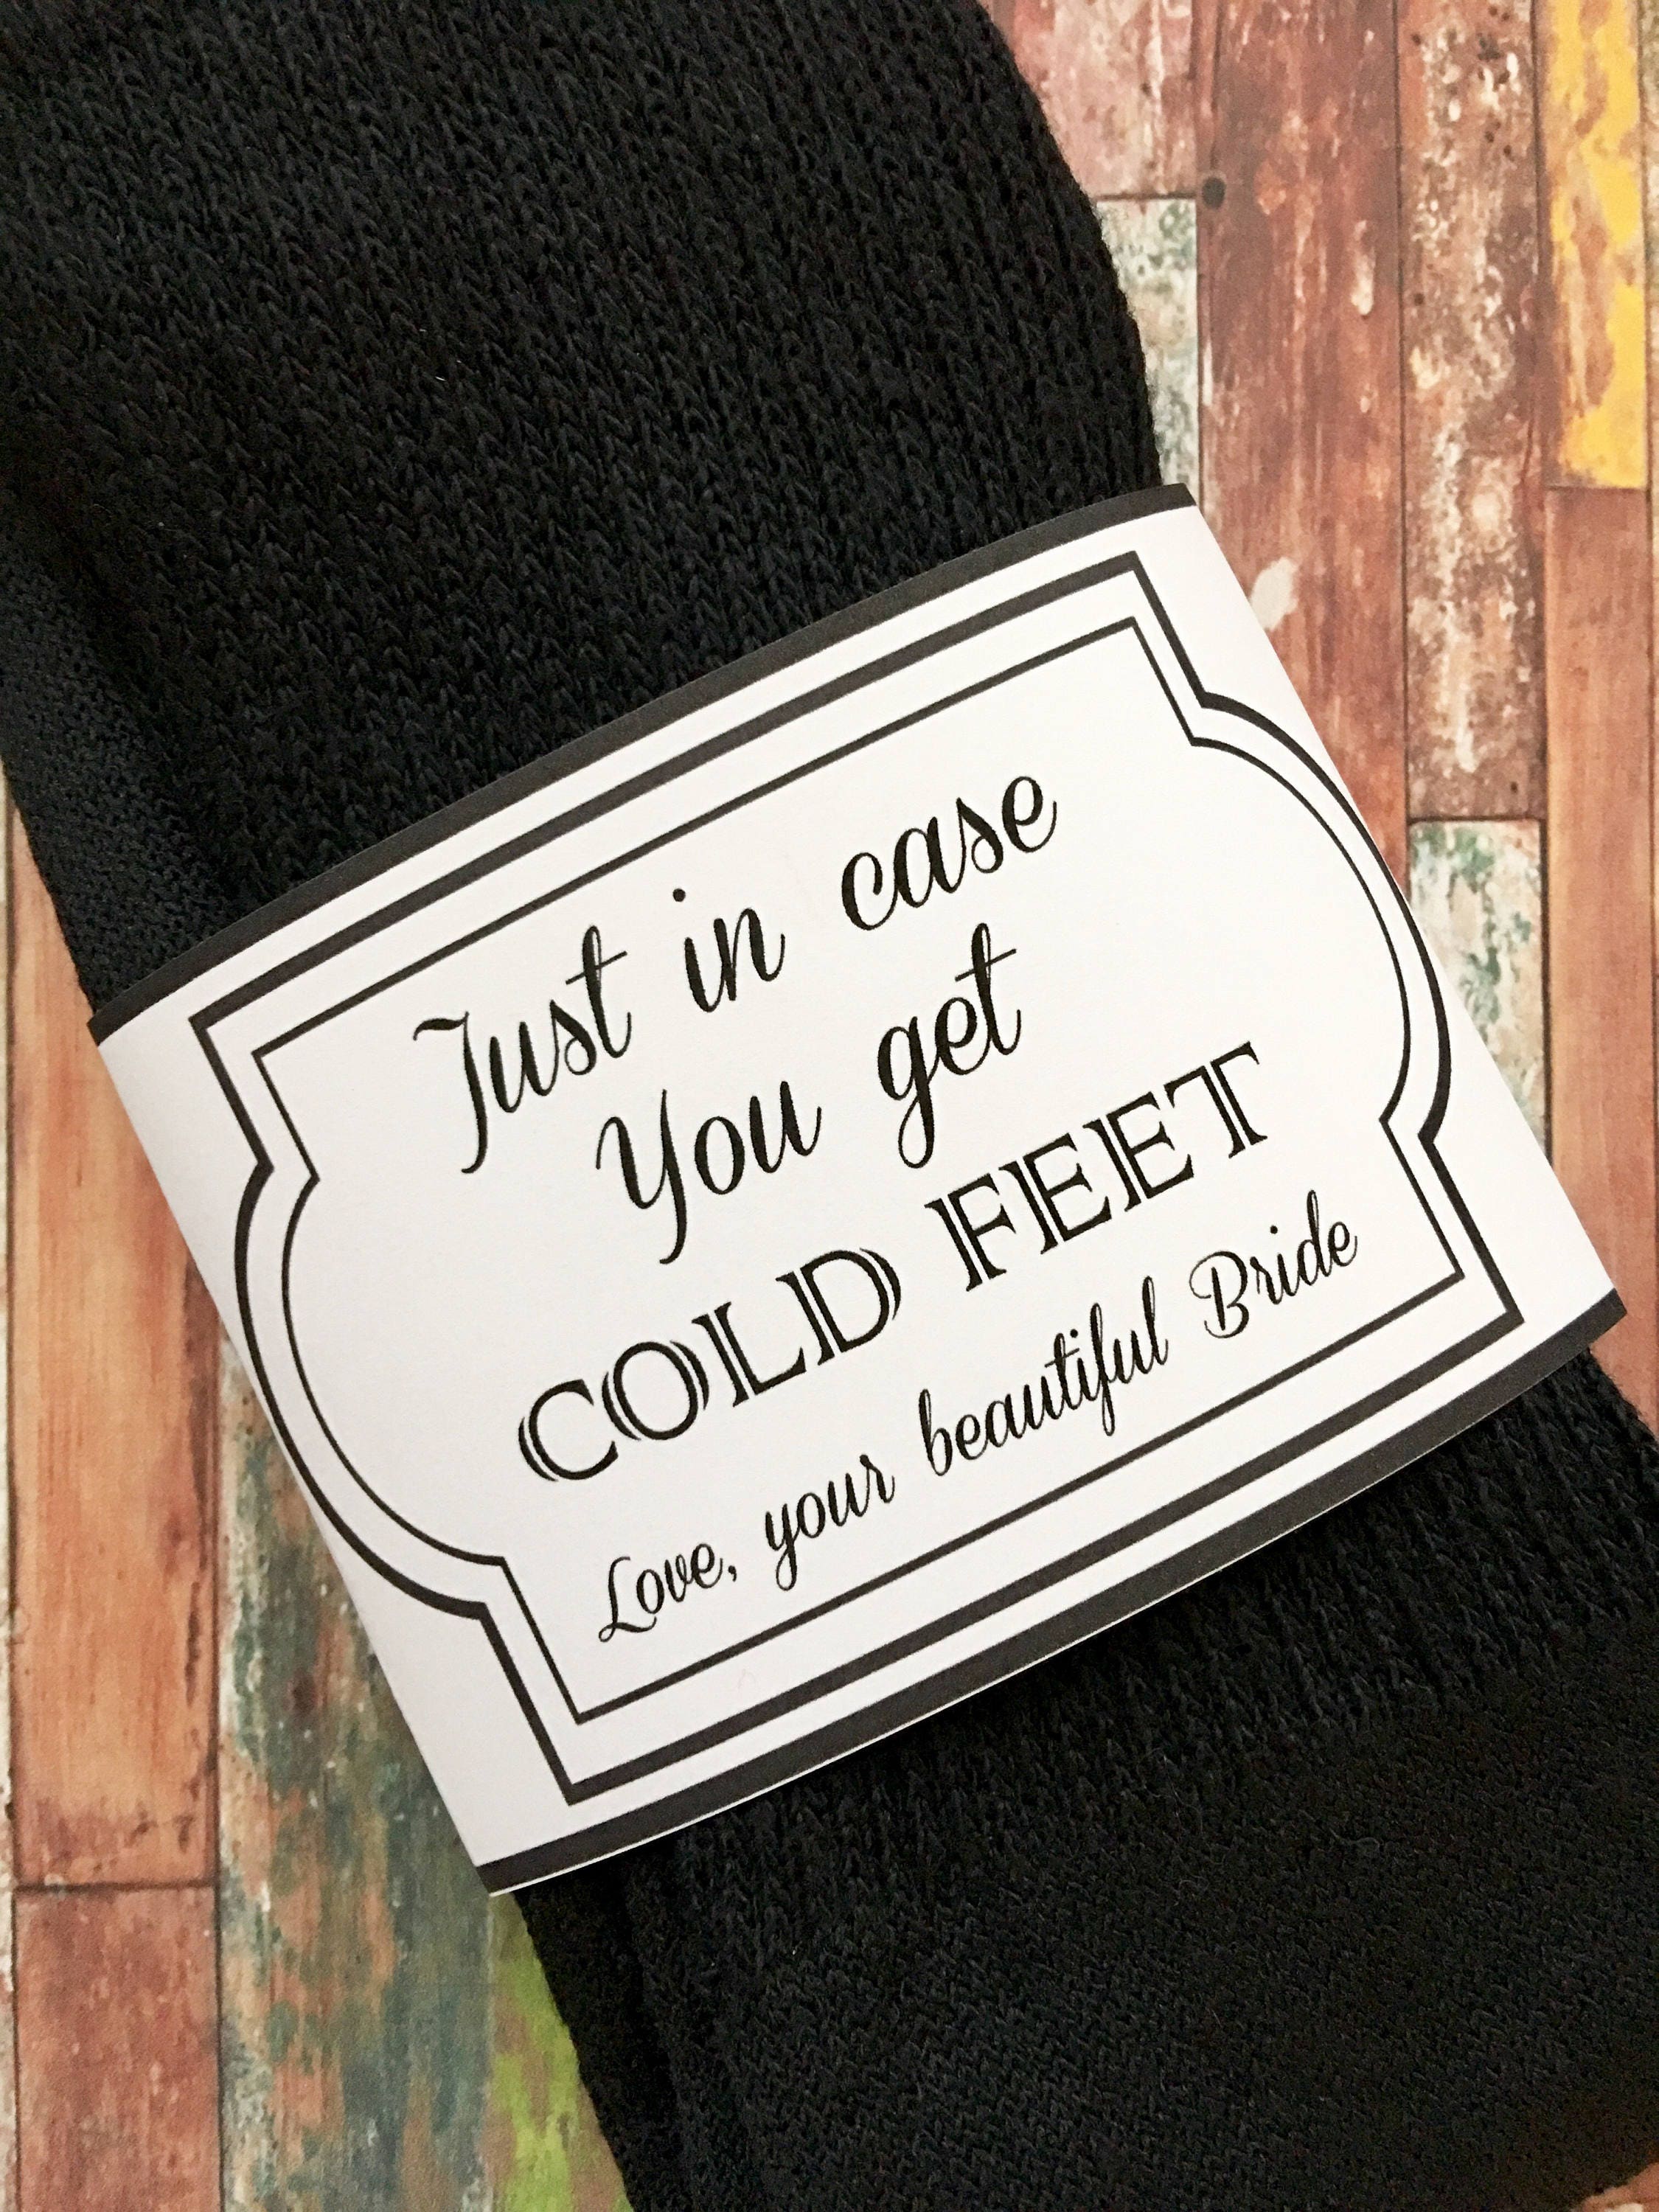 In case you get cold feet socks